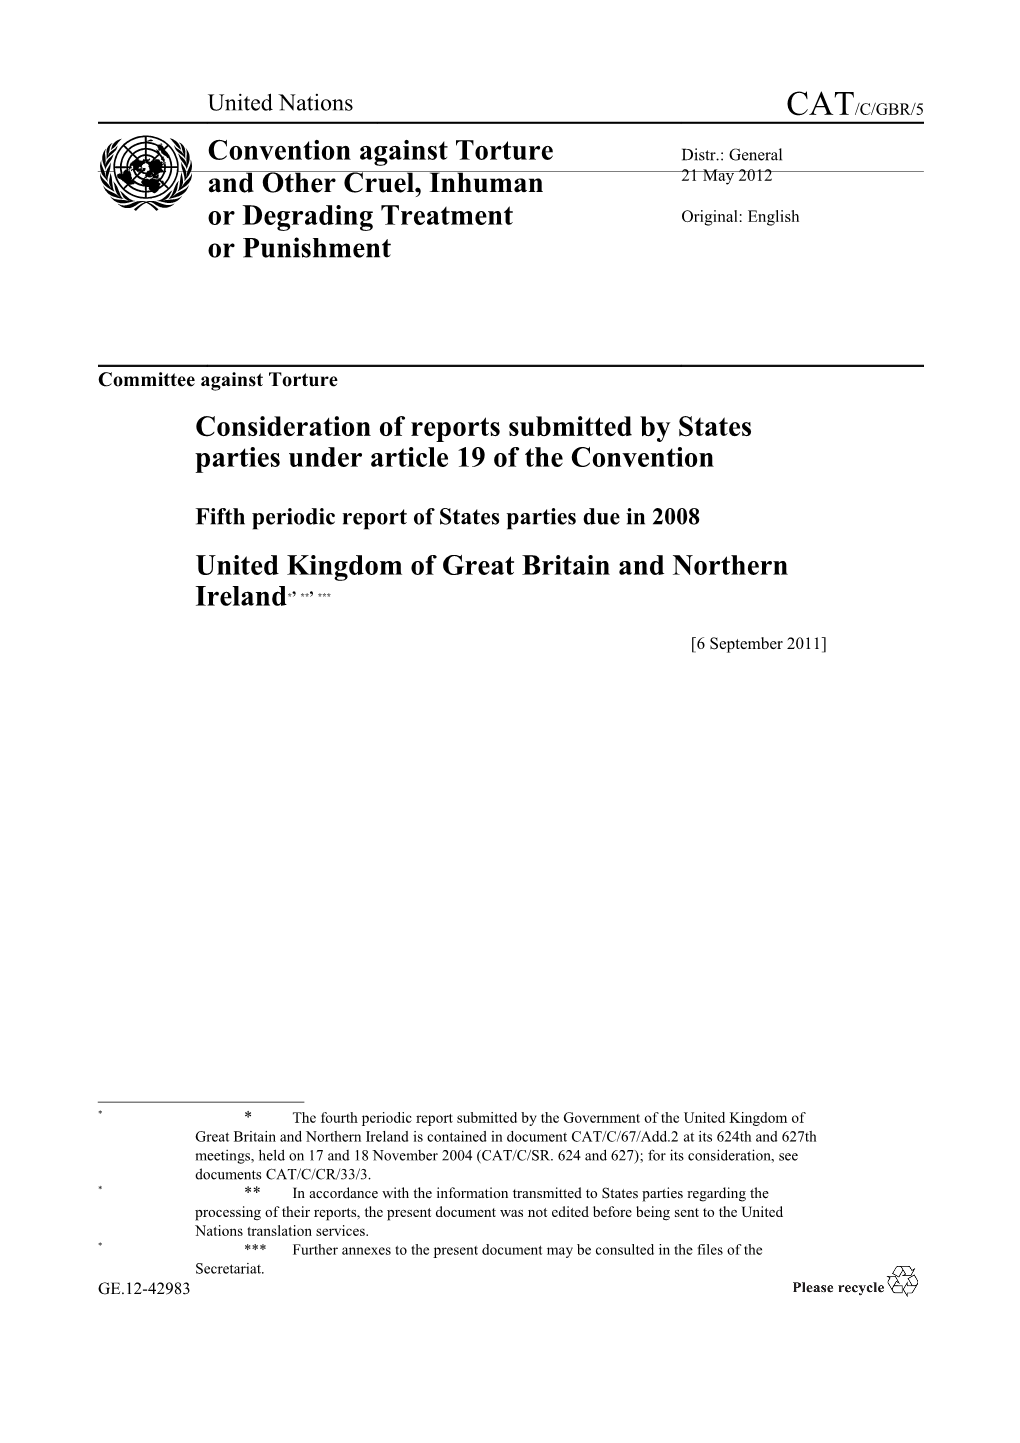 Consideration of Reports Submitted by States Parties Under Article19 of the Convention